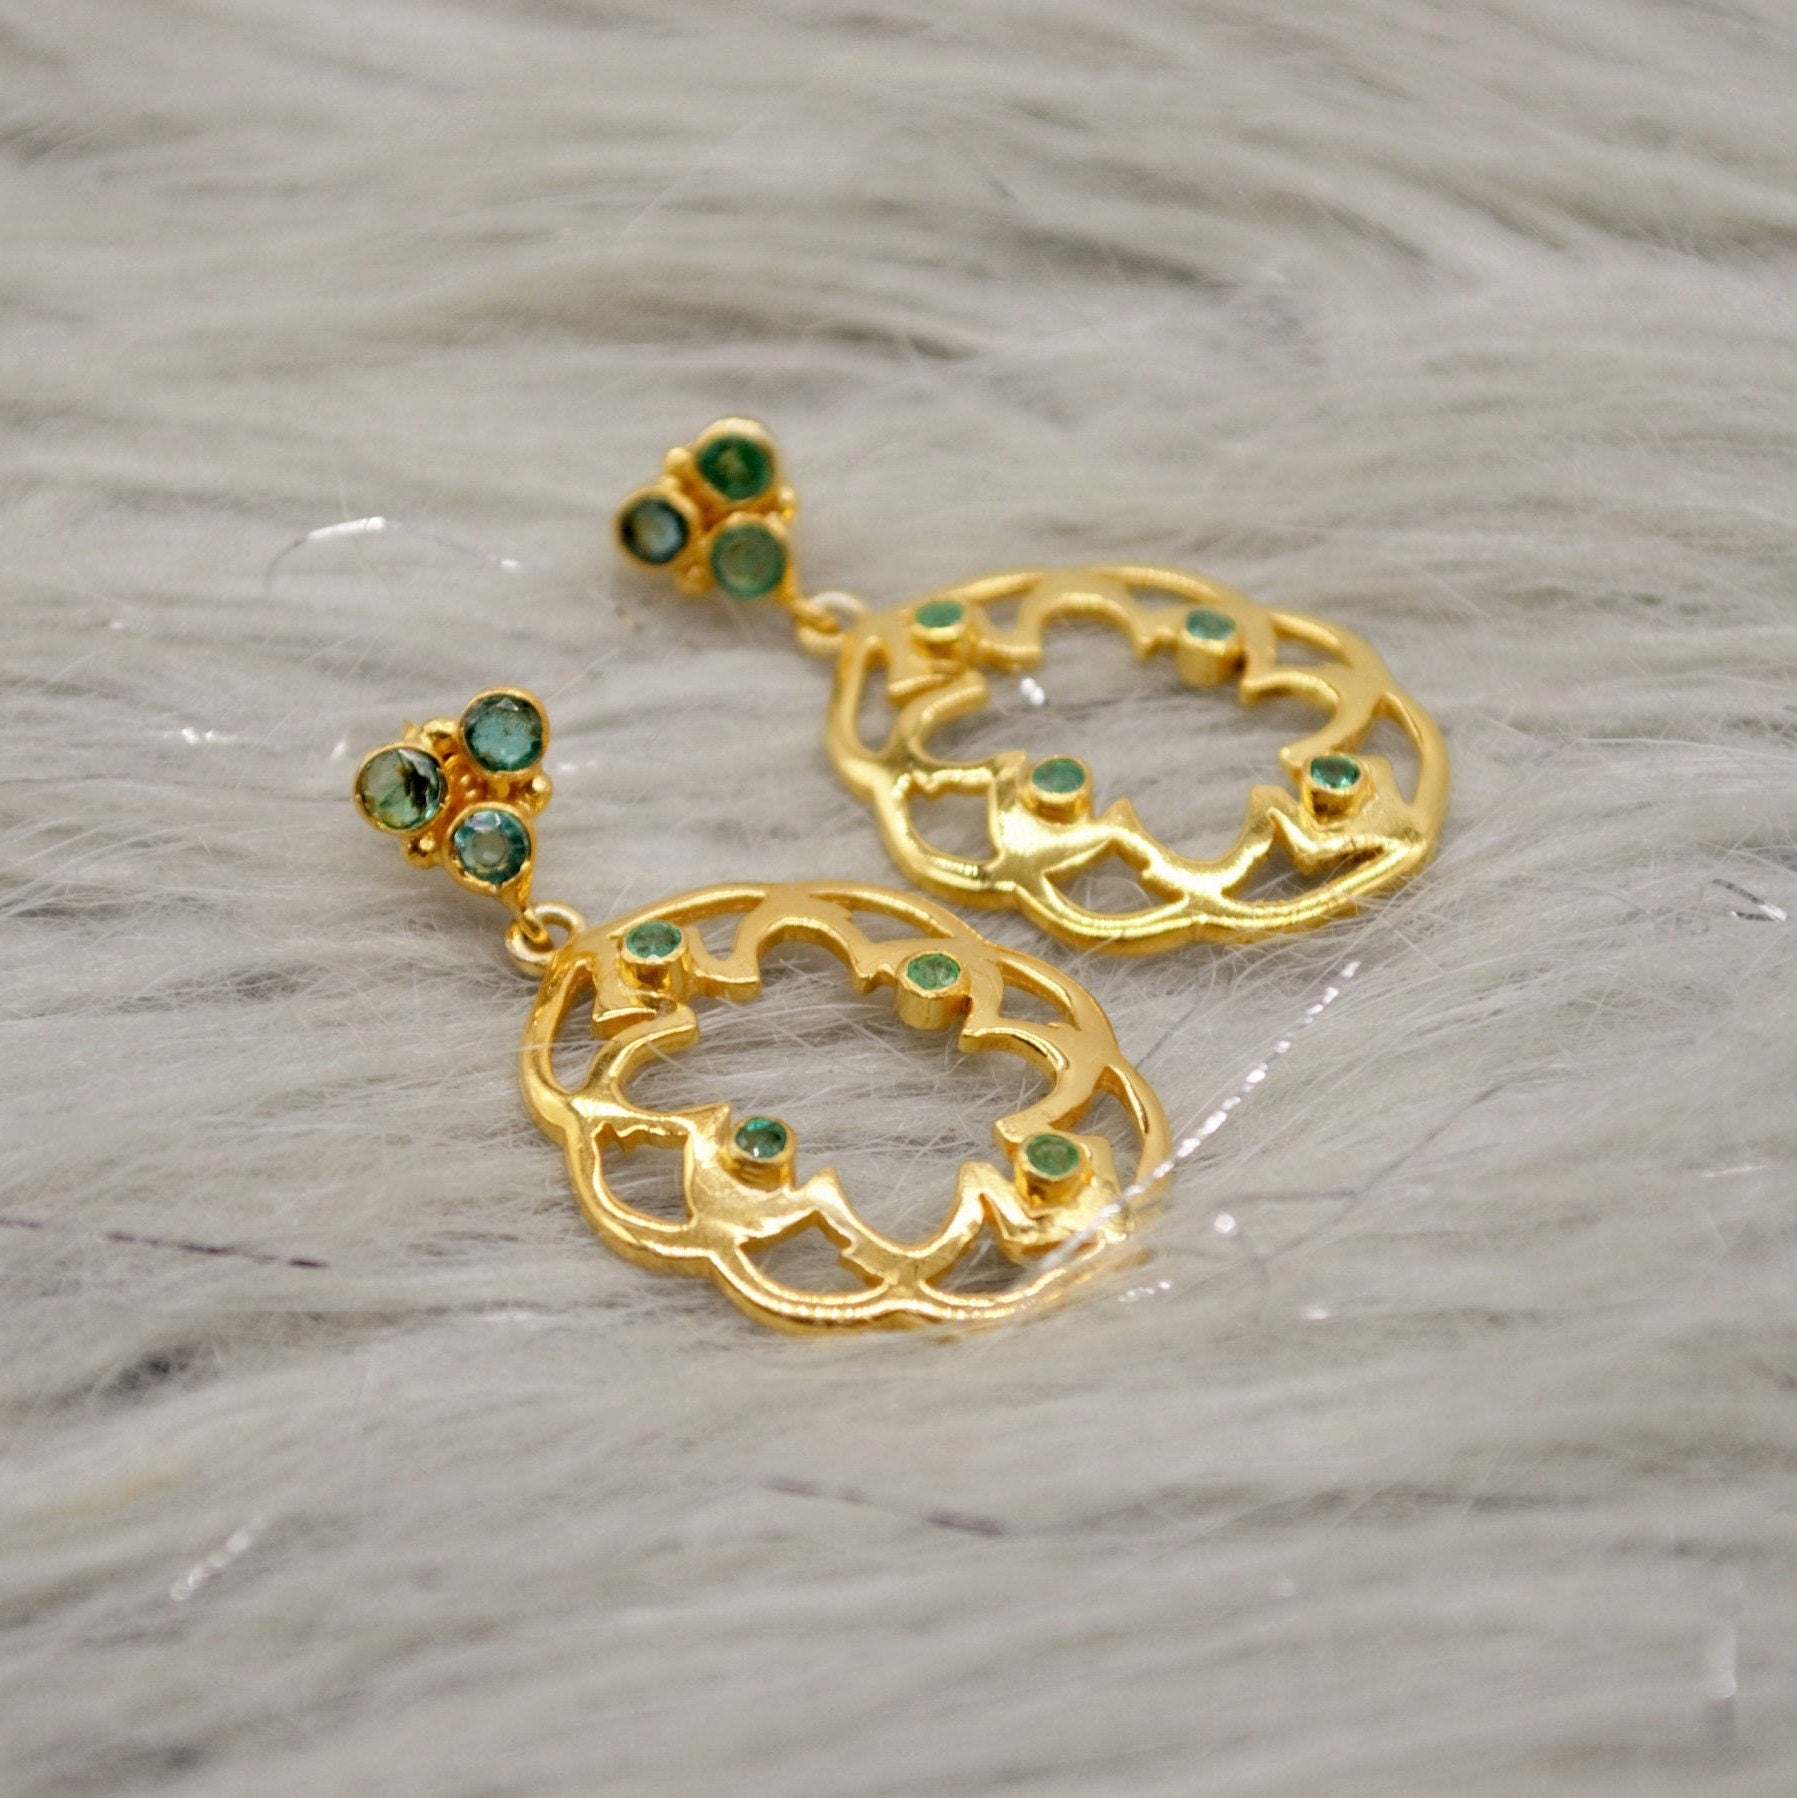 Green Emerald Earrings, Gold Plated Sterling Silver, Dangle Earrings Jewelry, May Birthstone Earrings, Gift For Her, Birthday Gift, Mom Gift